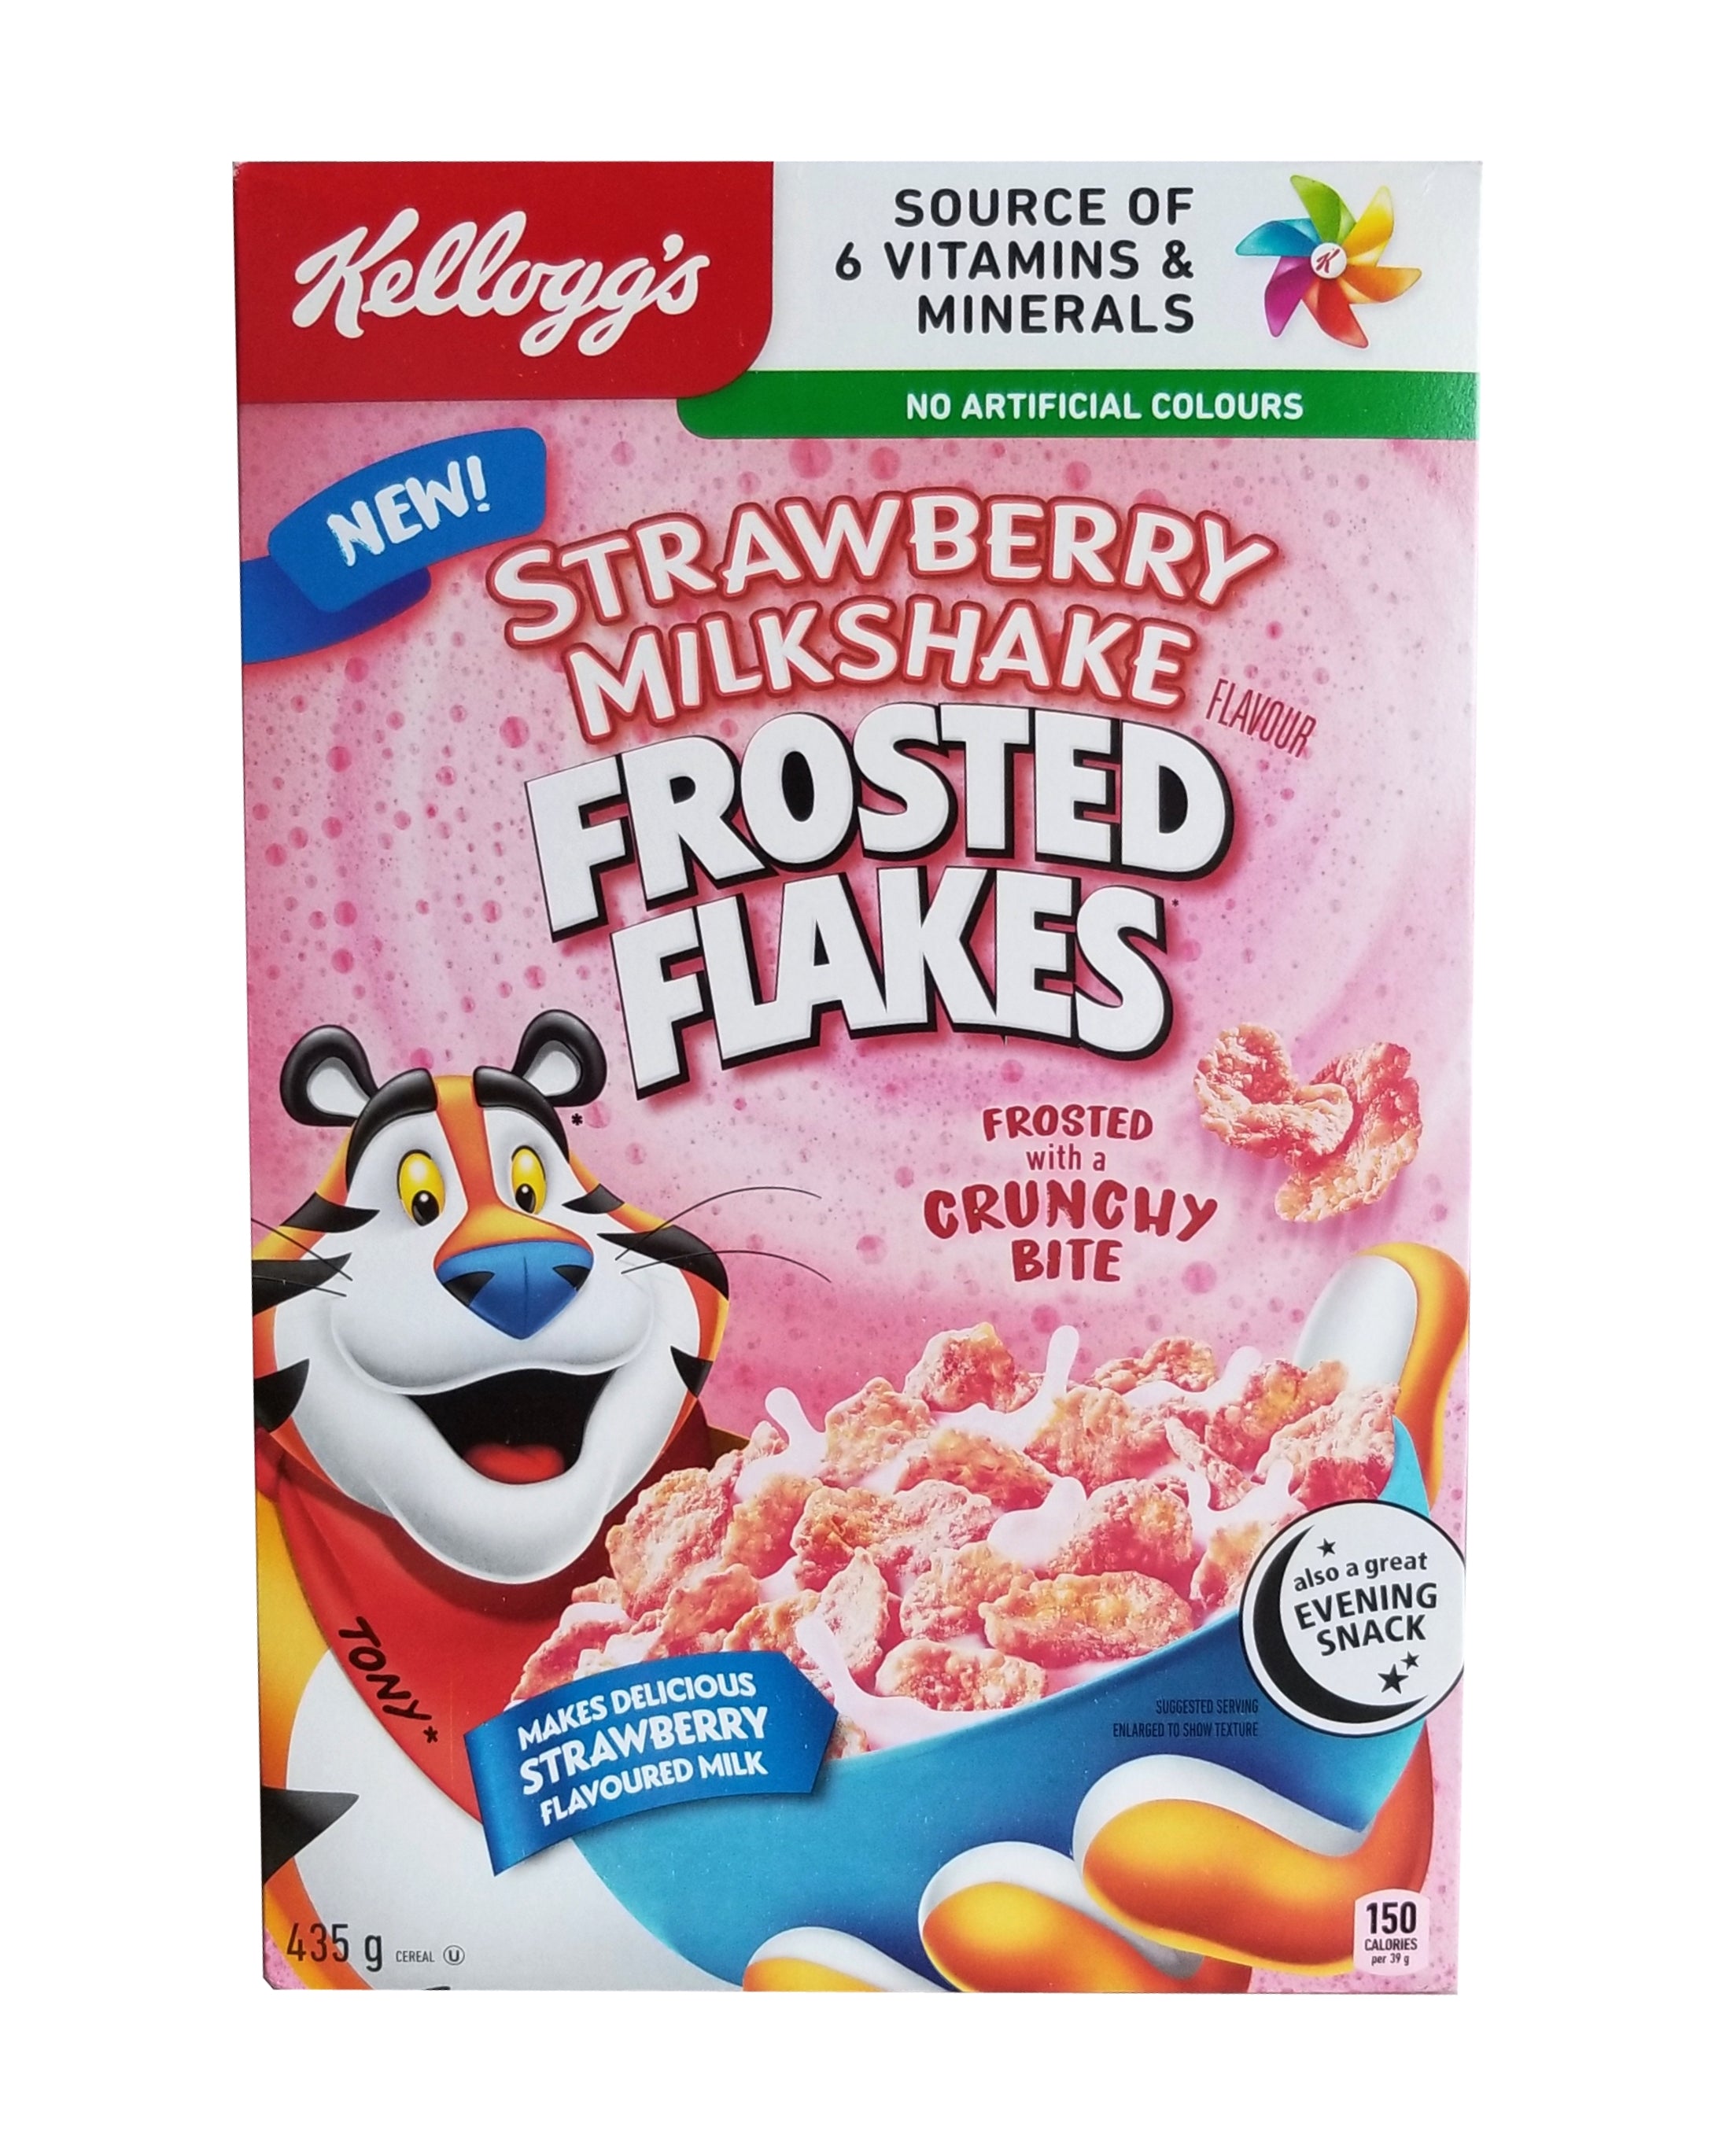 Kellogg's Frosted Flakes® Chocolate Milkshake Cereal